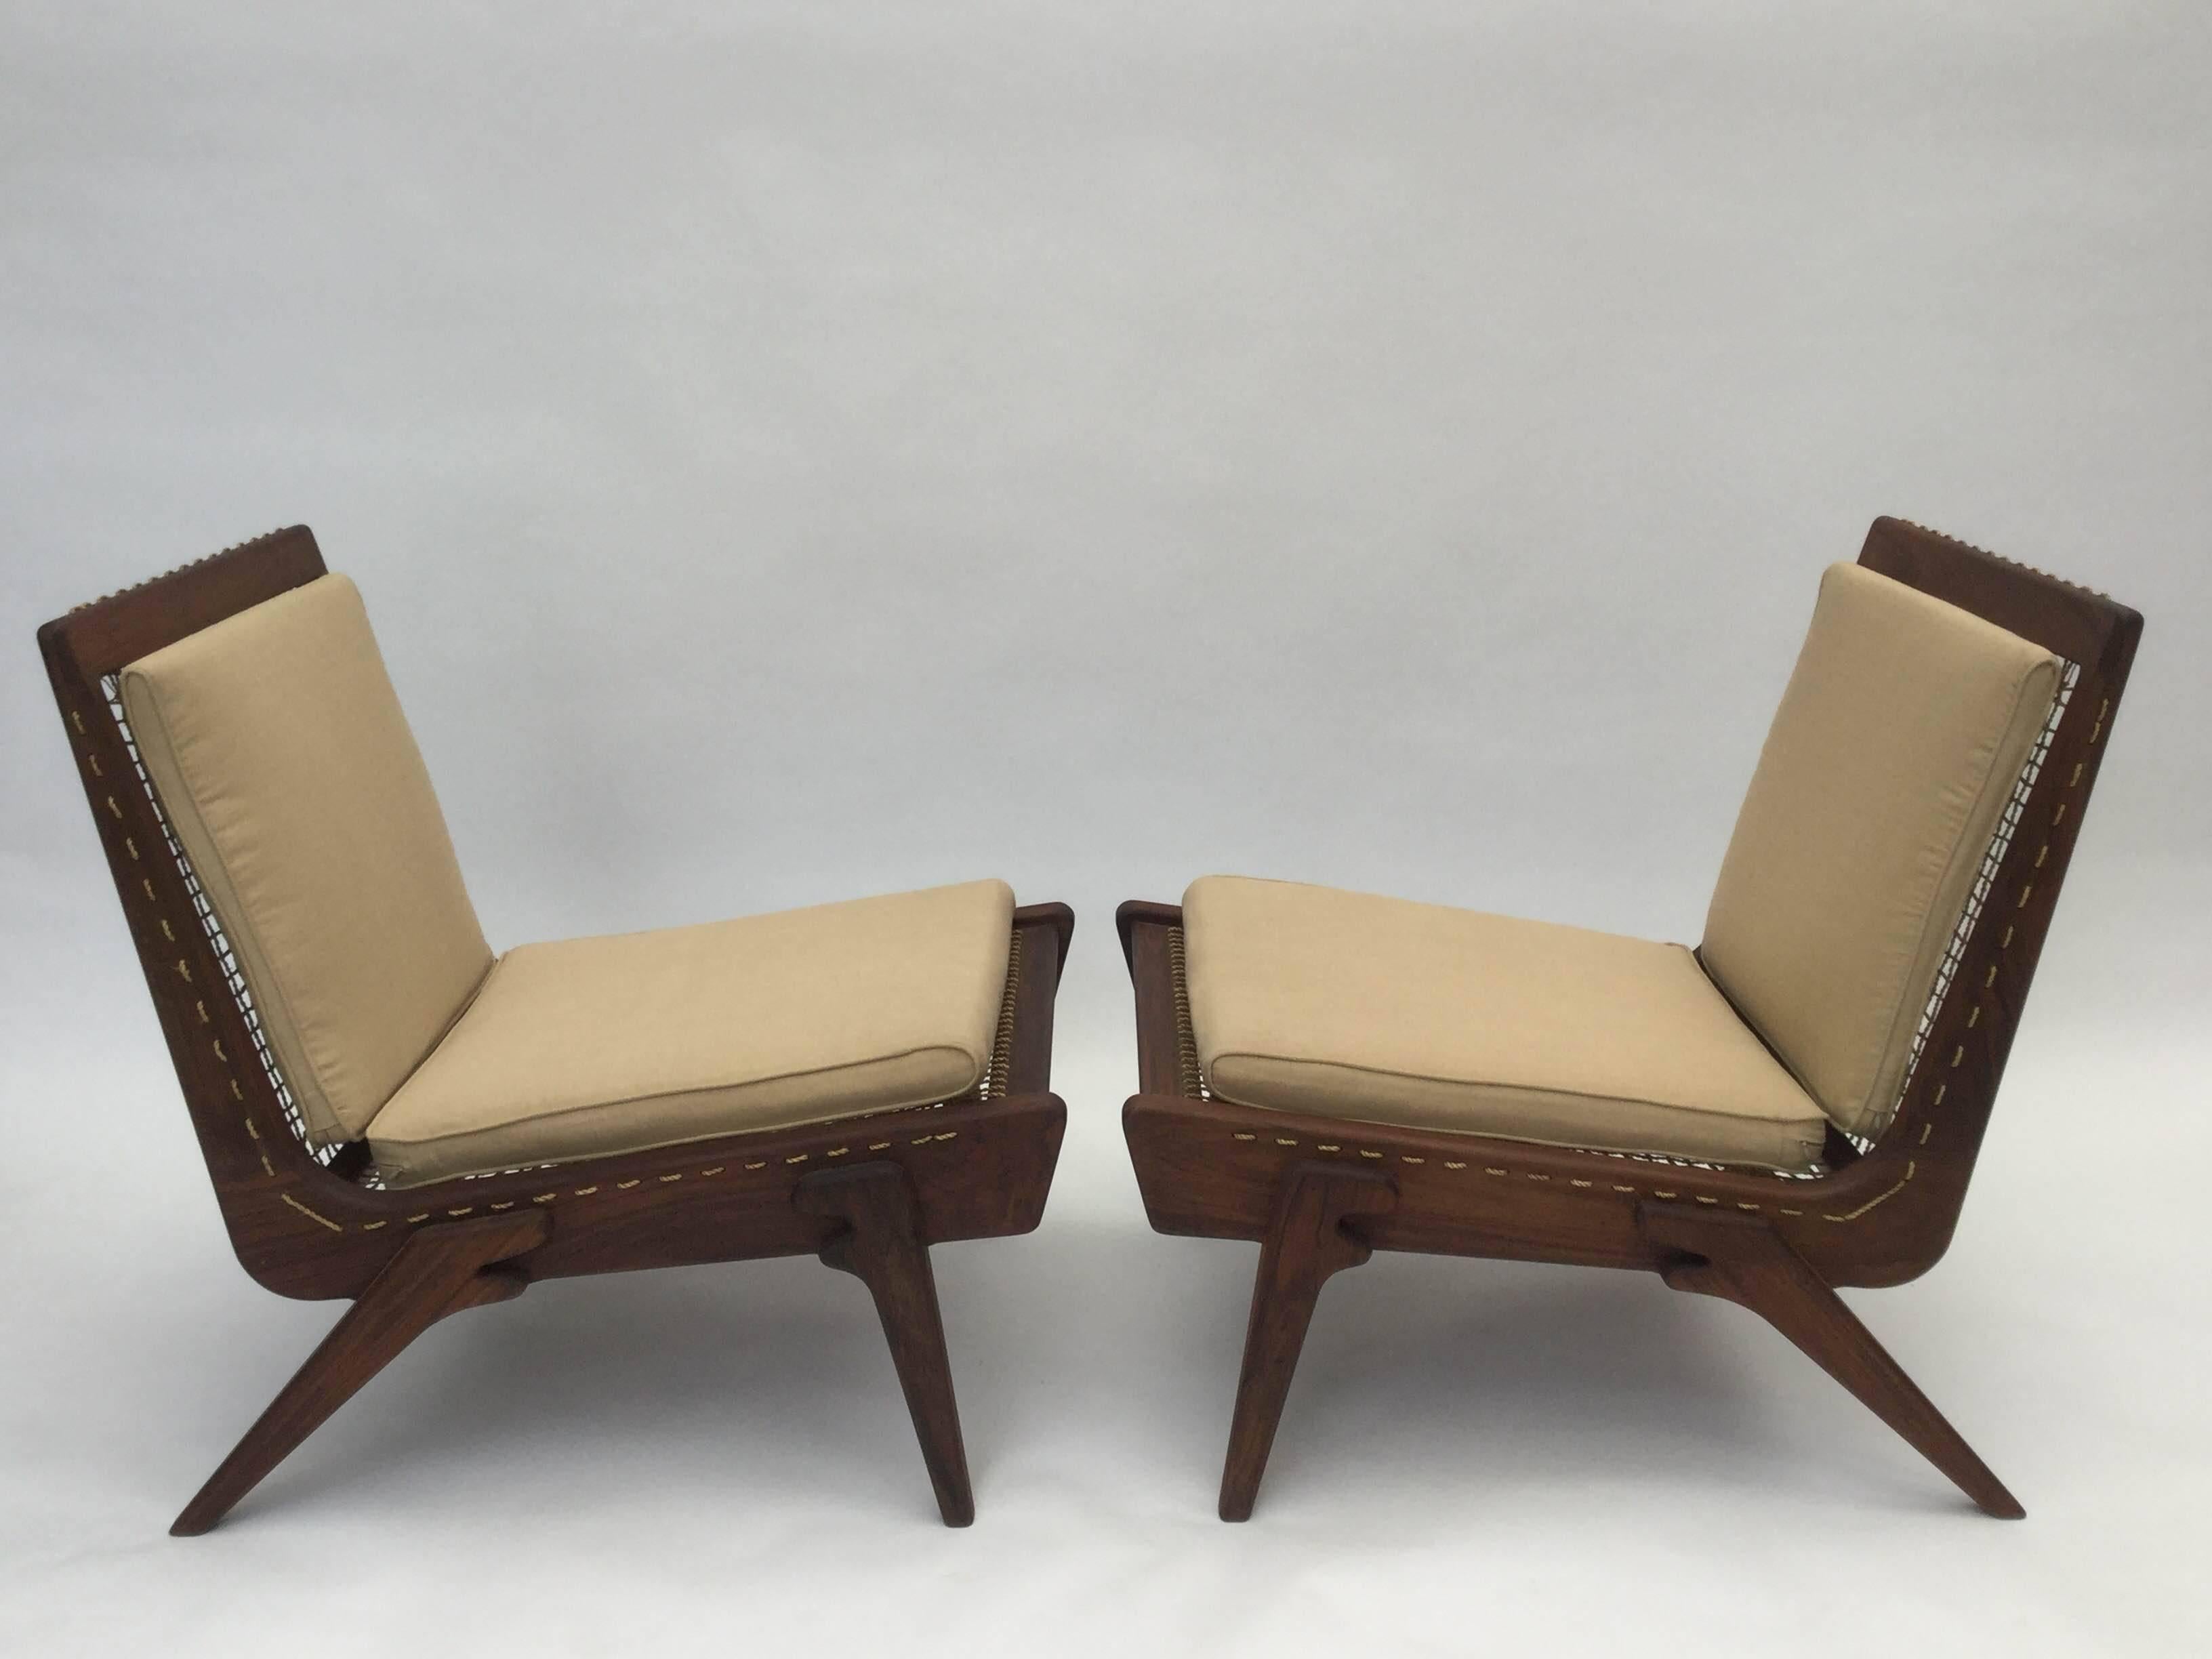 Pair of Yucatan Limited edition Lounge Chairs Designed by George Allen 1